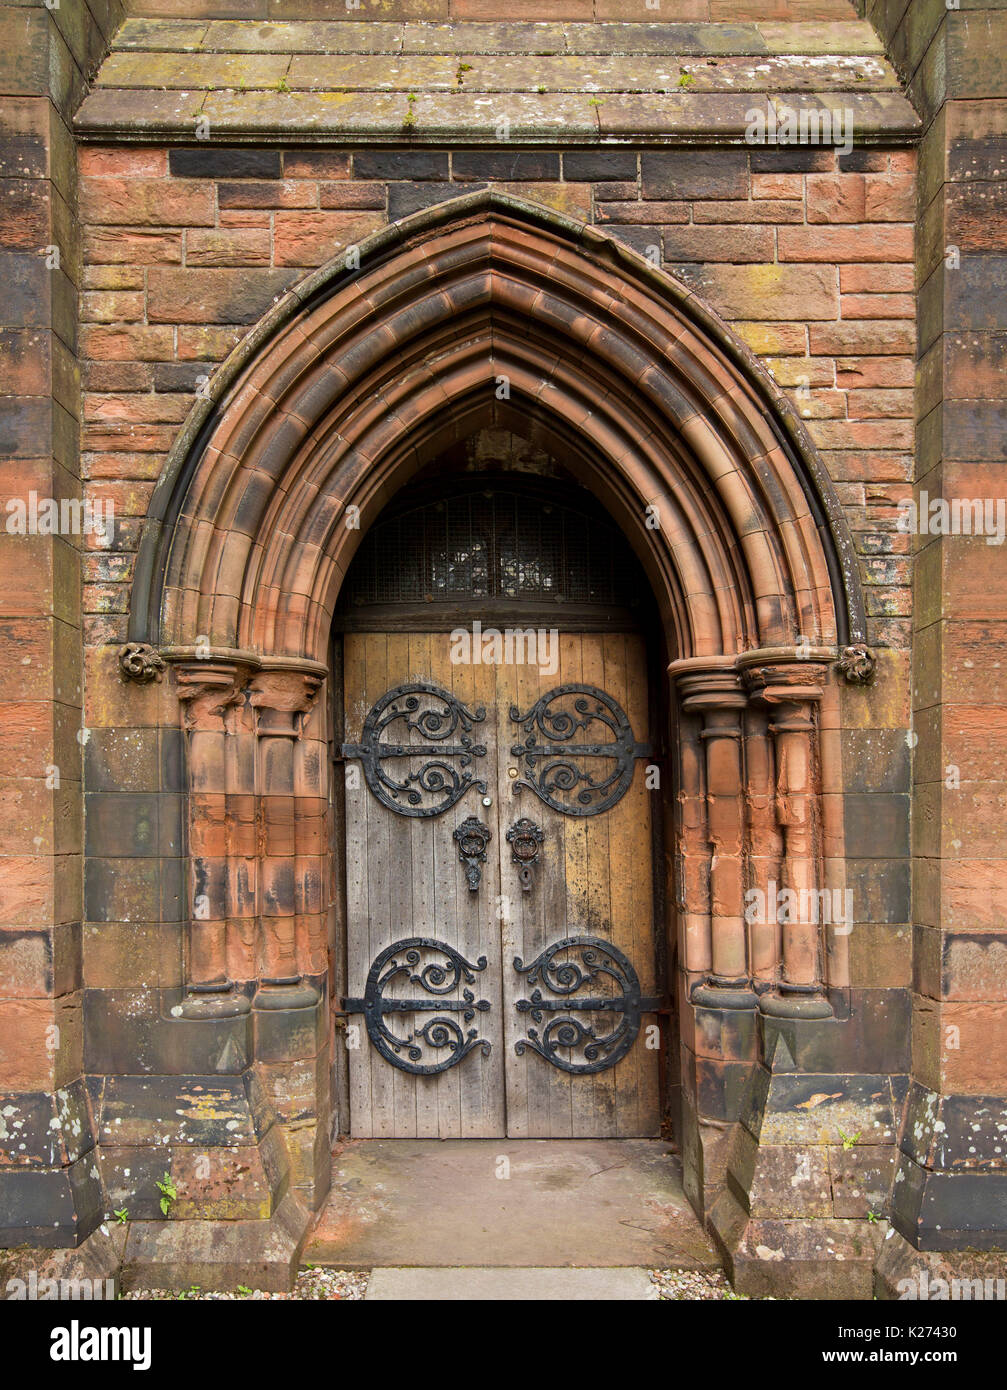 Arched door with huge & ornate hinges in imposing stone archway at entrance to historic Thomas Coats Memorial Baptist church in Paisley, Scotland Stock Photo